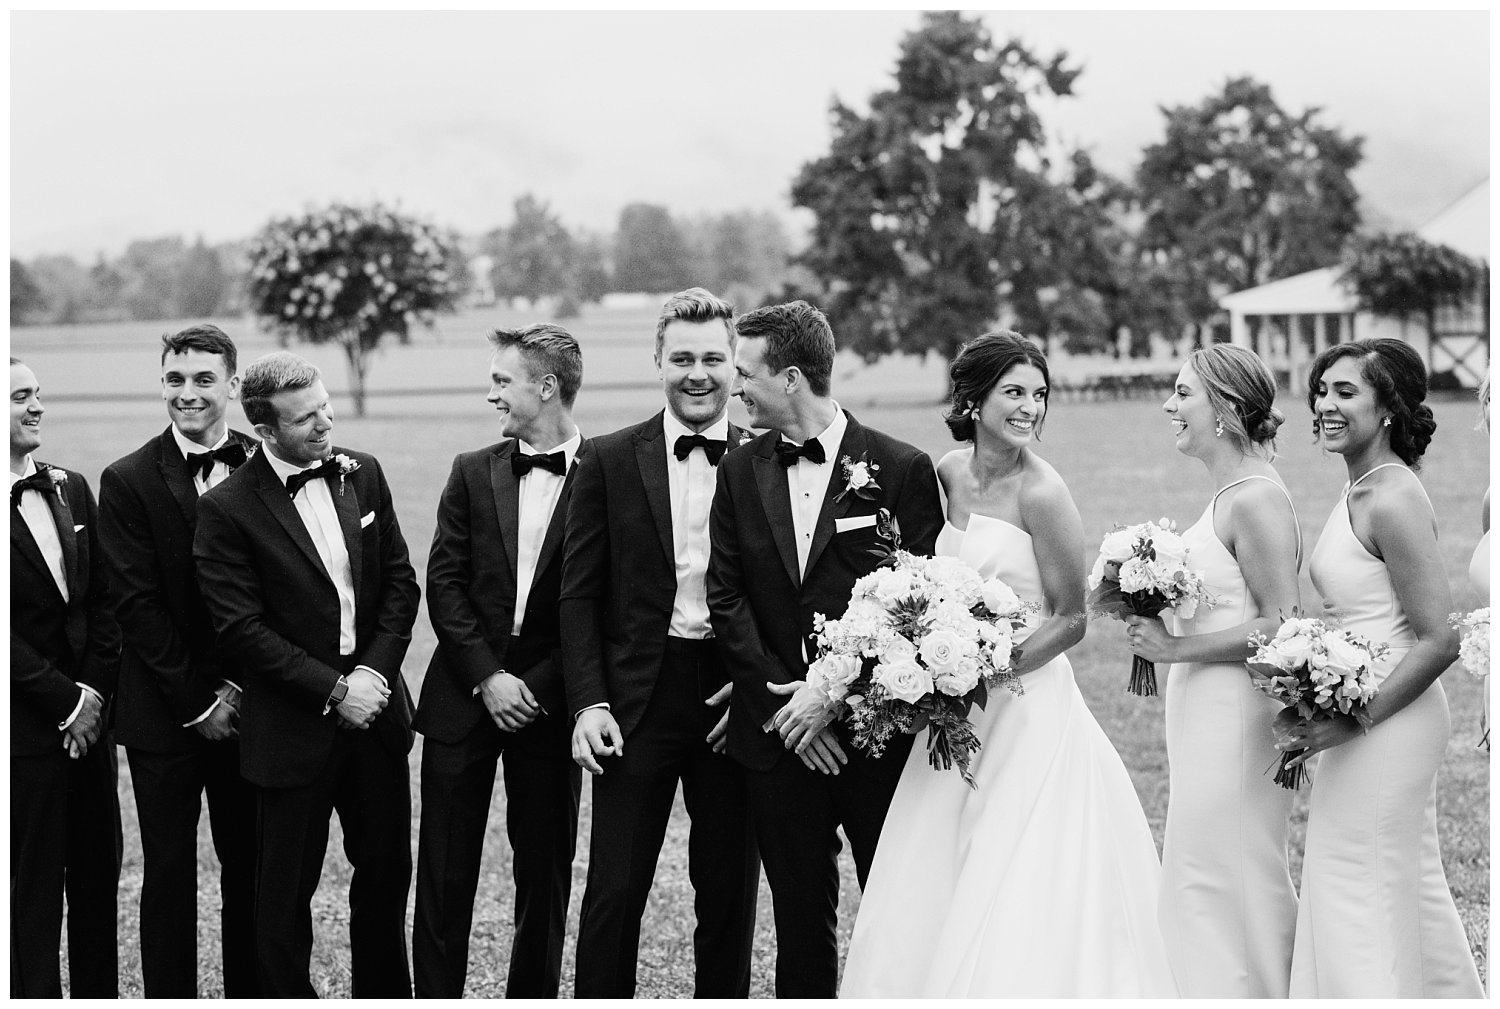 Bride and groom with wedding party with groomsmen in black tuxes and bridesmaids in champagne dresses